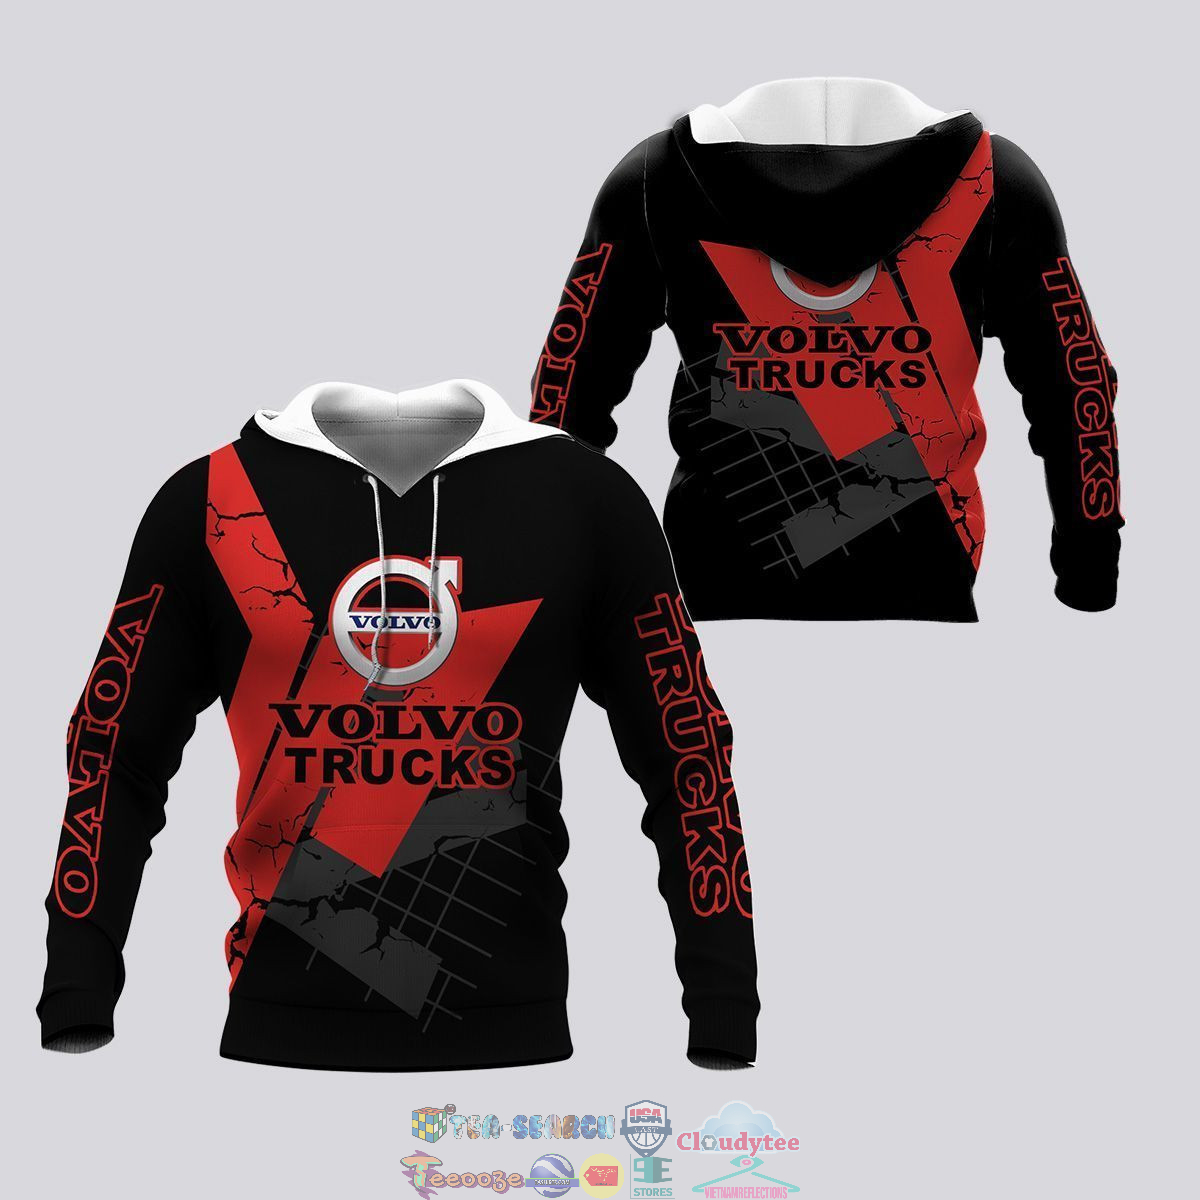 Volvo Trucks Red 3D hoodie and t-shirt